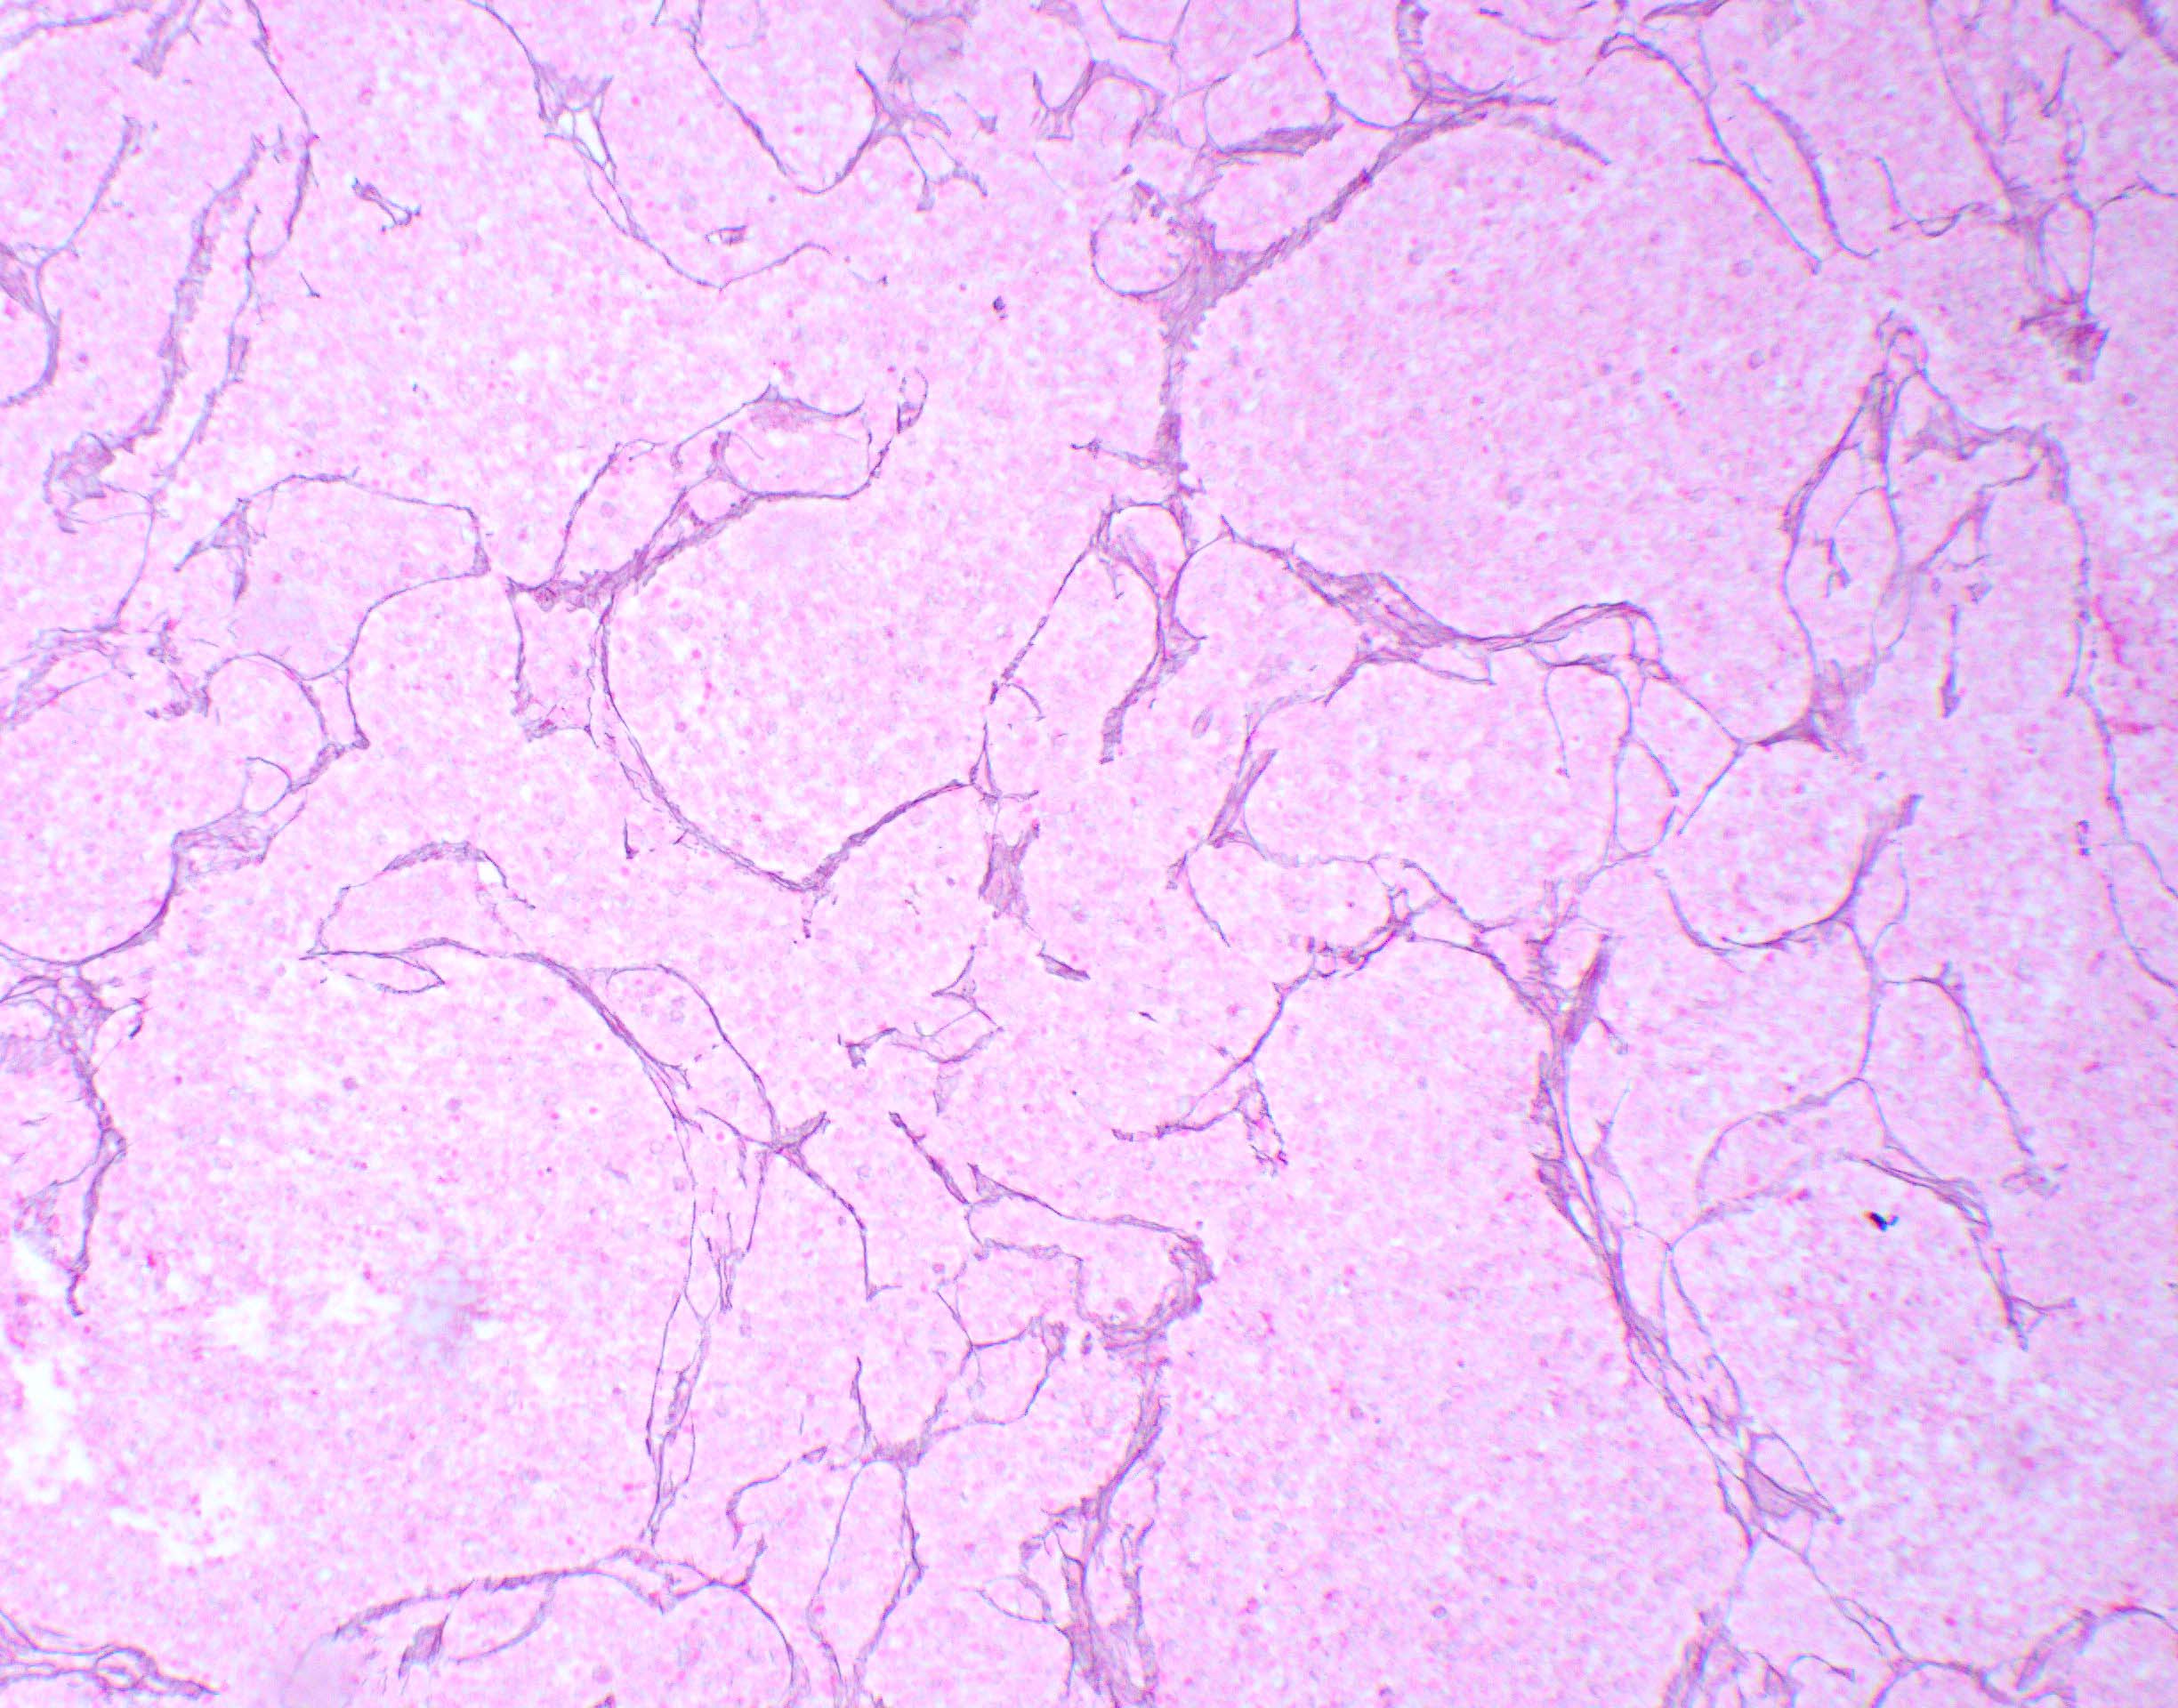 Vague nodular formation with reticulin